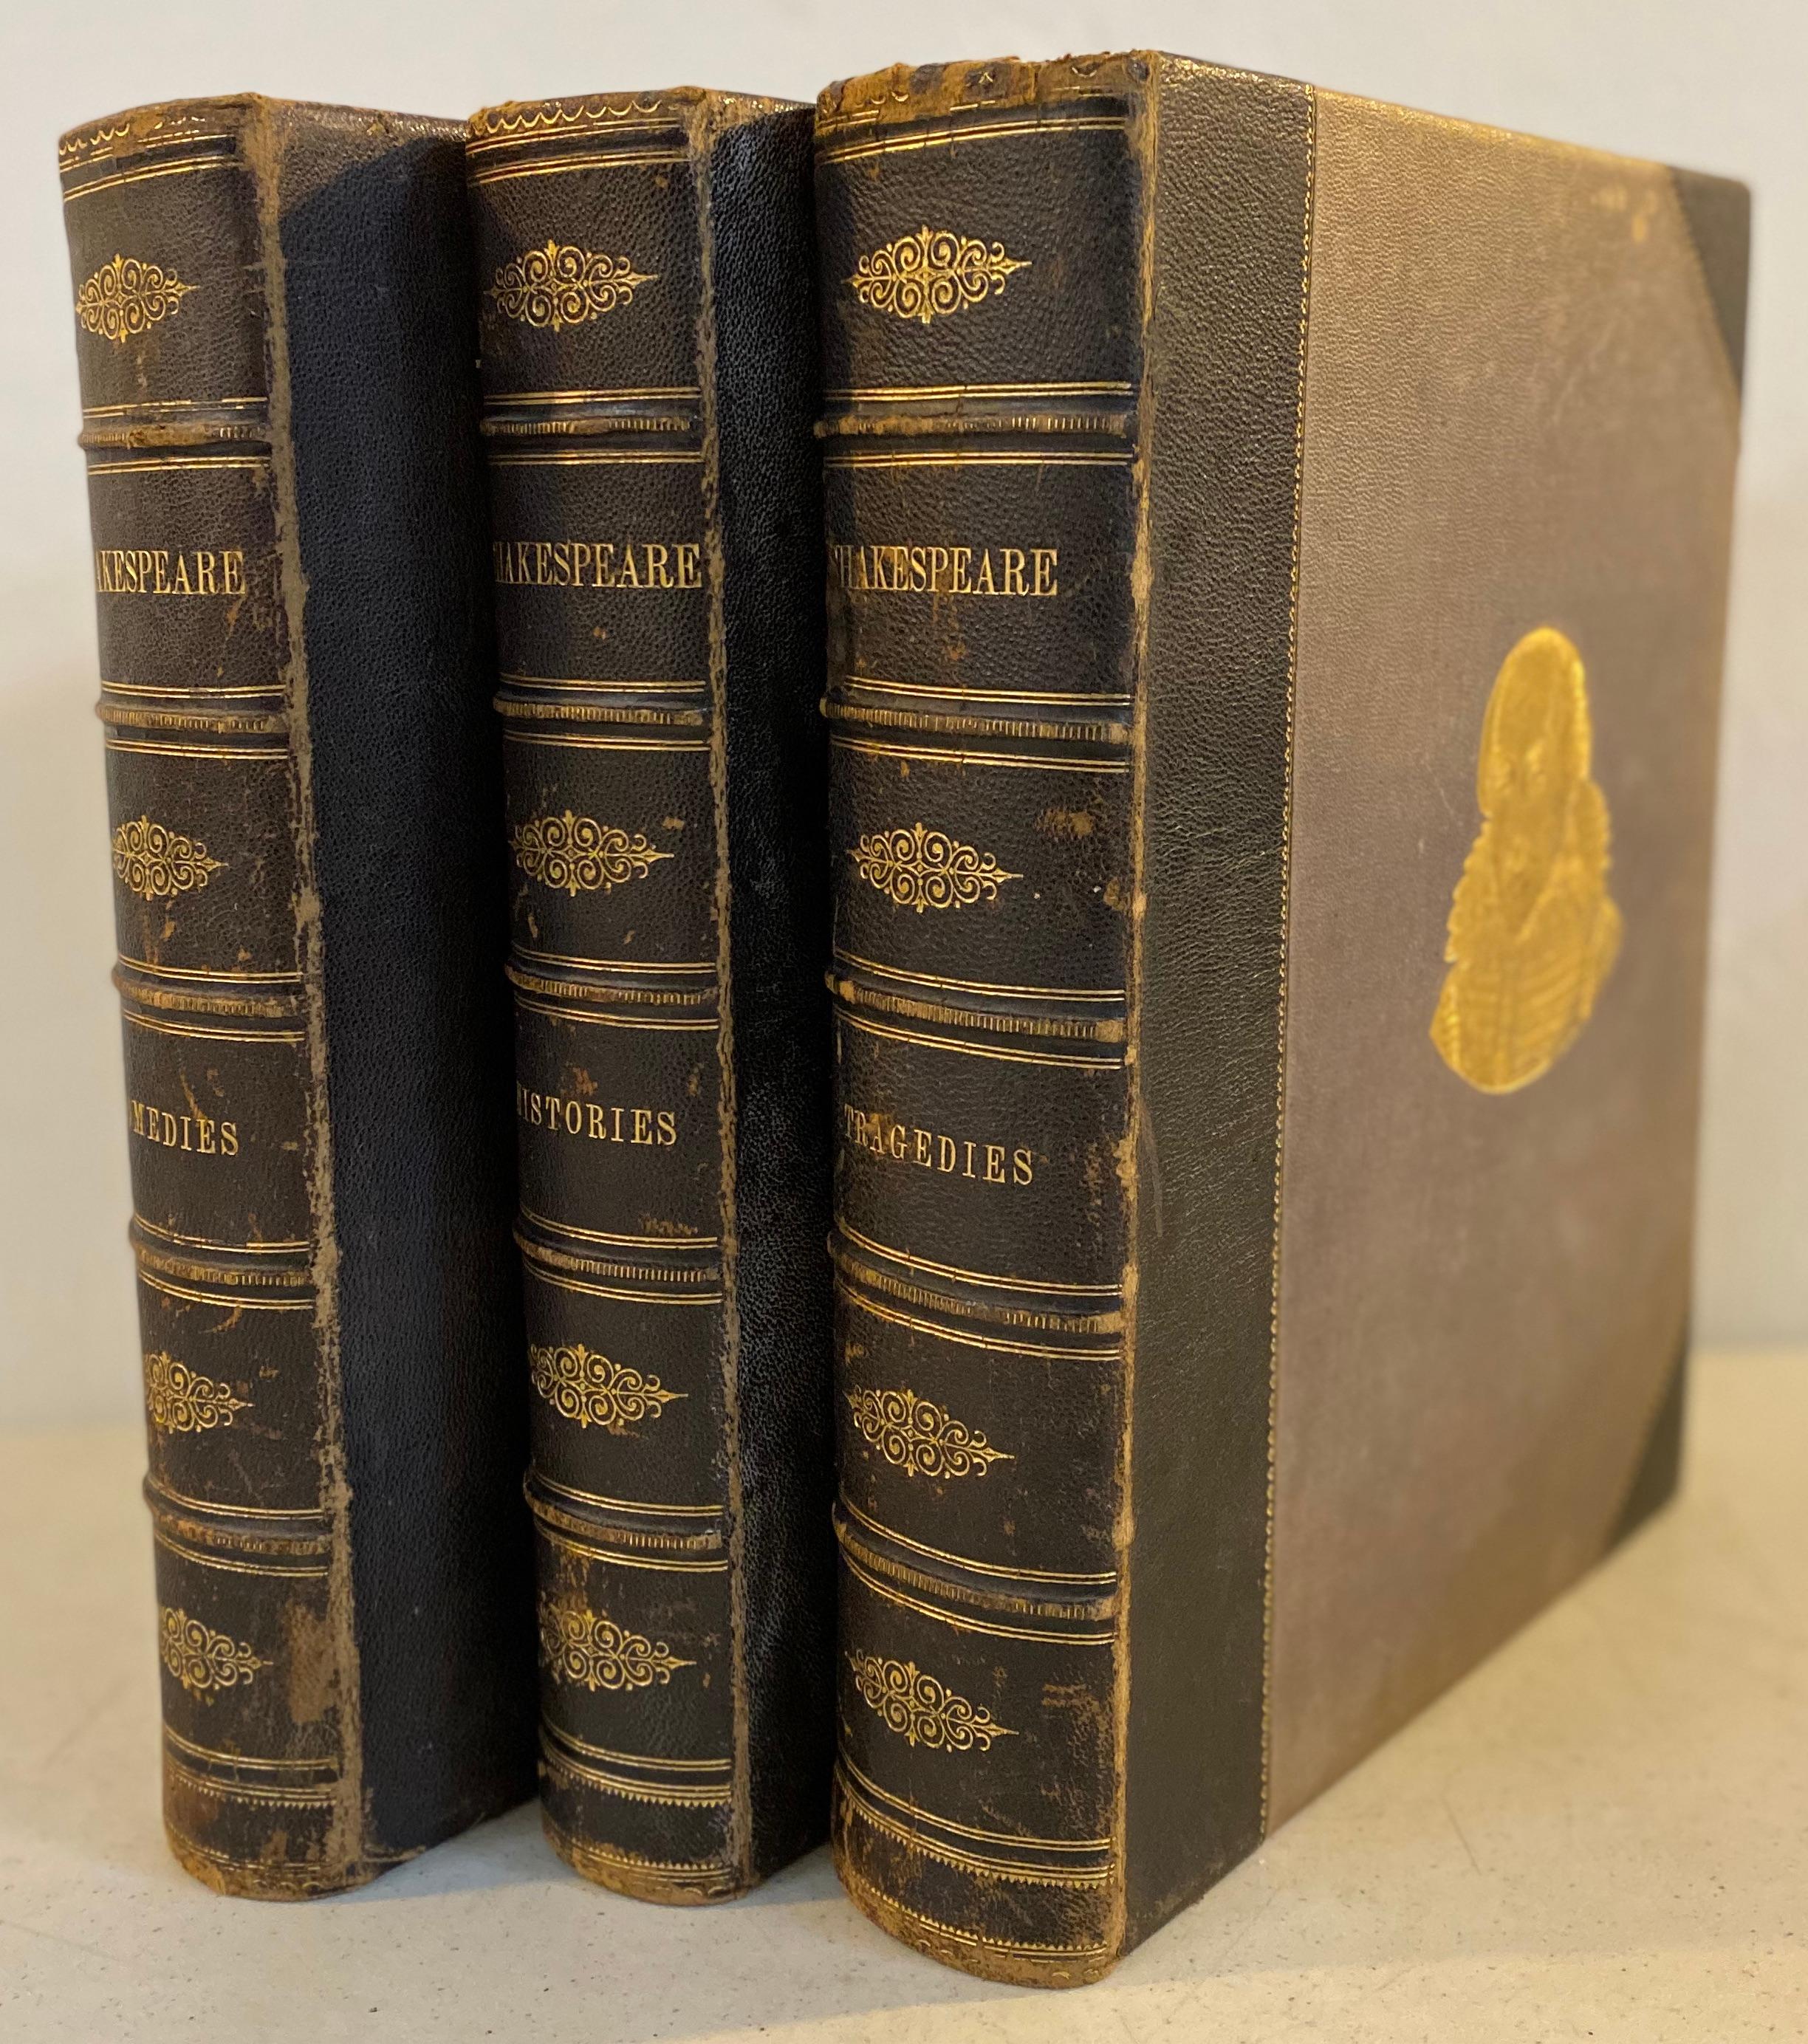 19th century Works of William Shakespeare comedies, histories, tragedies 3 volumes

Each volume is filled with a collection of outstanding highly detailed engravings

Each volume measures 10